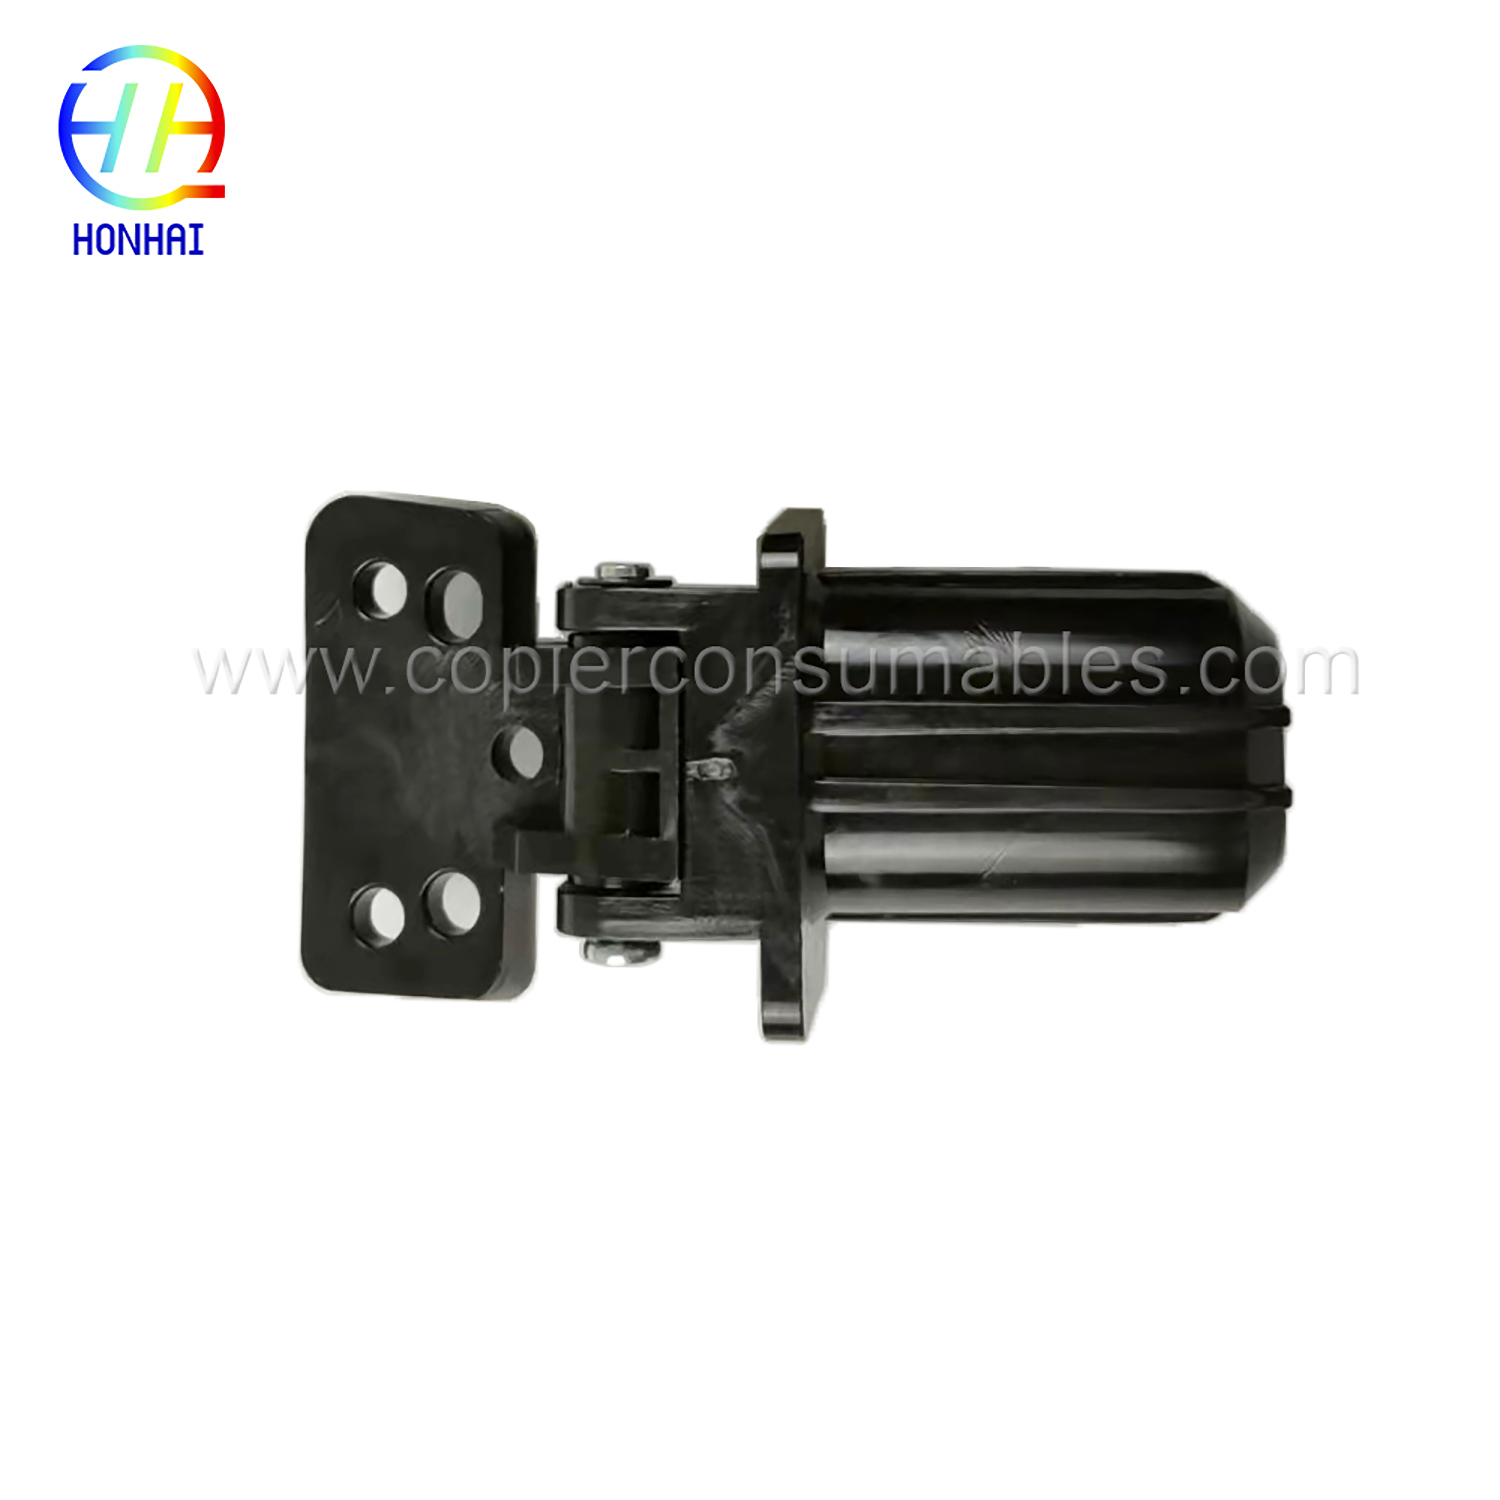 Wholesale Discount Steam Heated Hair Rollers - ADF Hinge for HP Color Laser jet Pro 400 MFP M425DW M425DN M521DN M521DW M476DN M476DW M476NW Pro 500 MFP M570DN – HONHAI